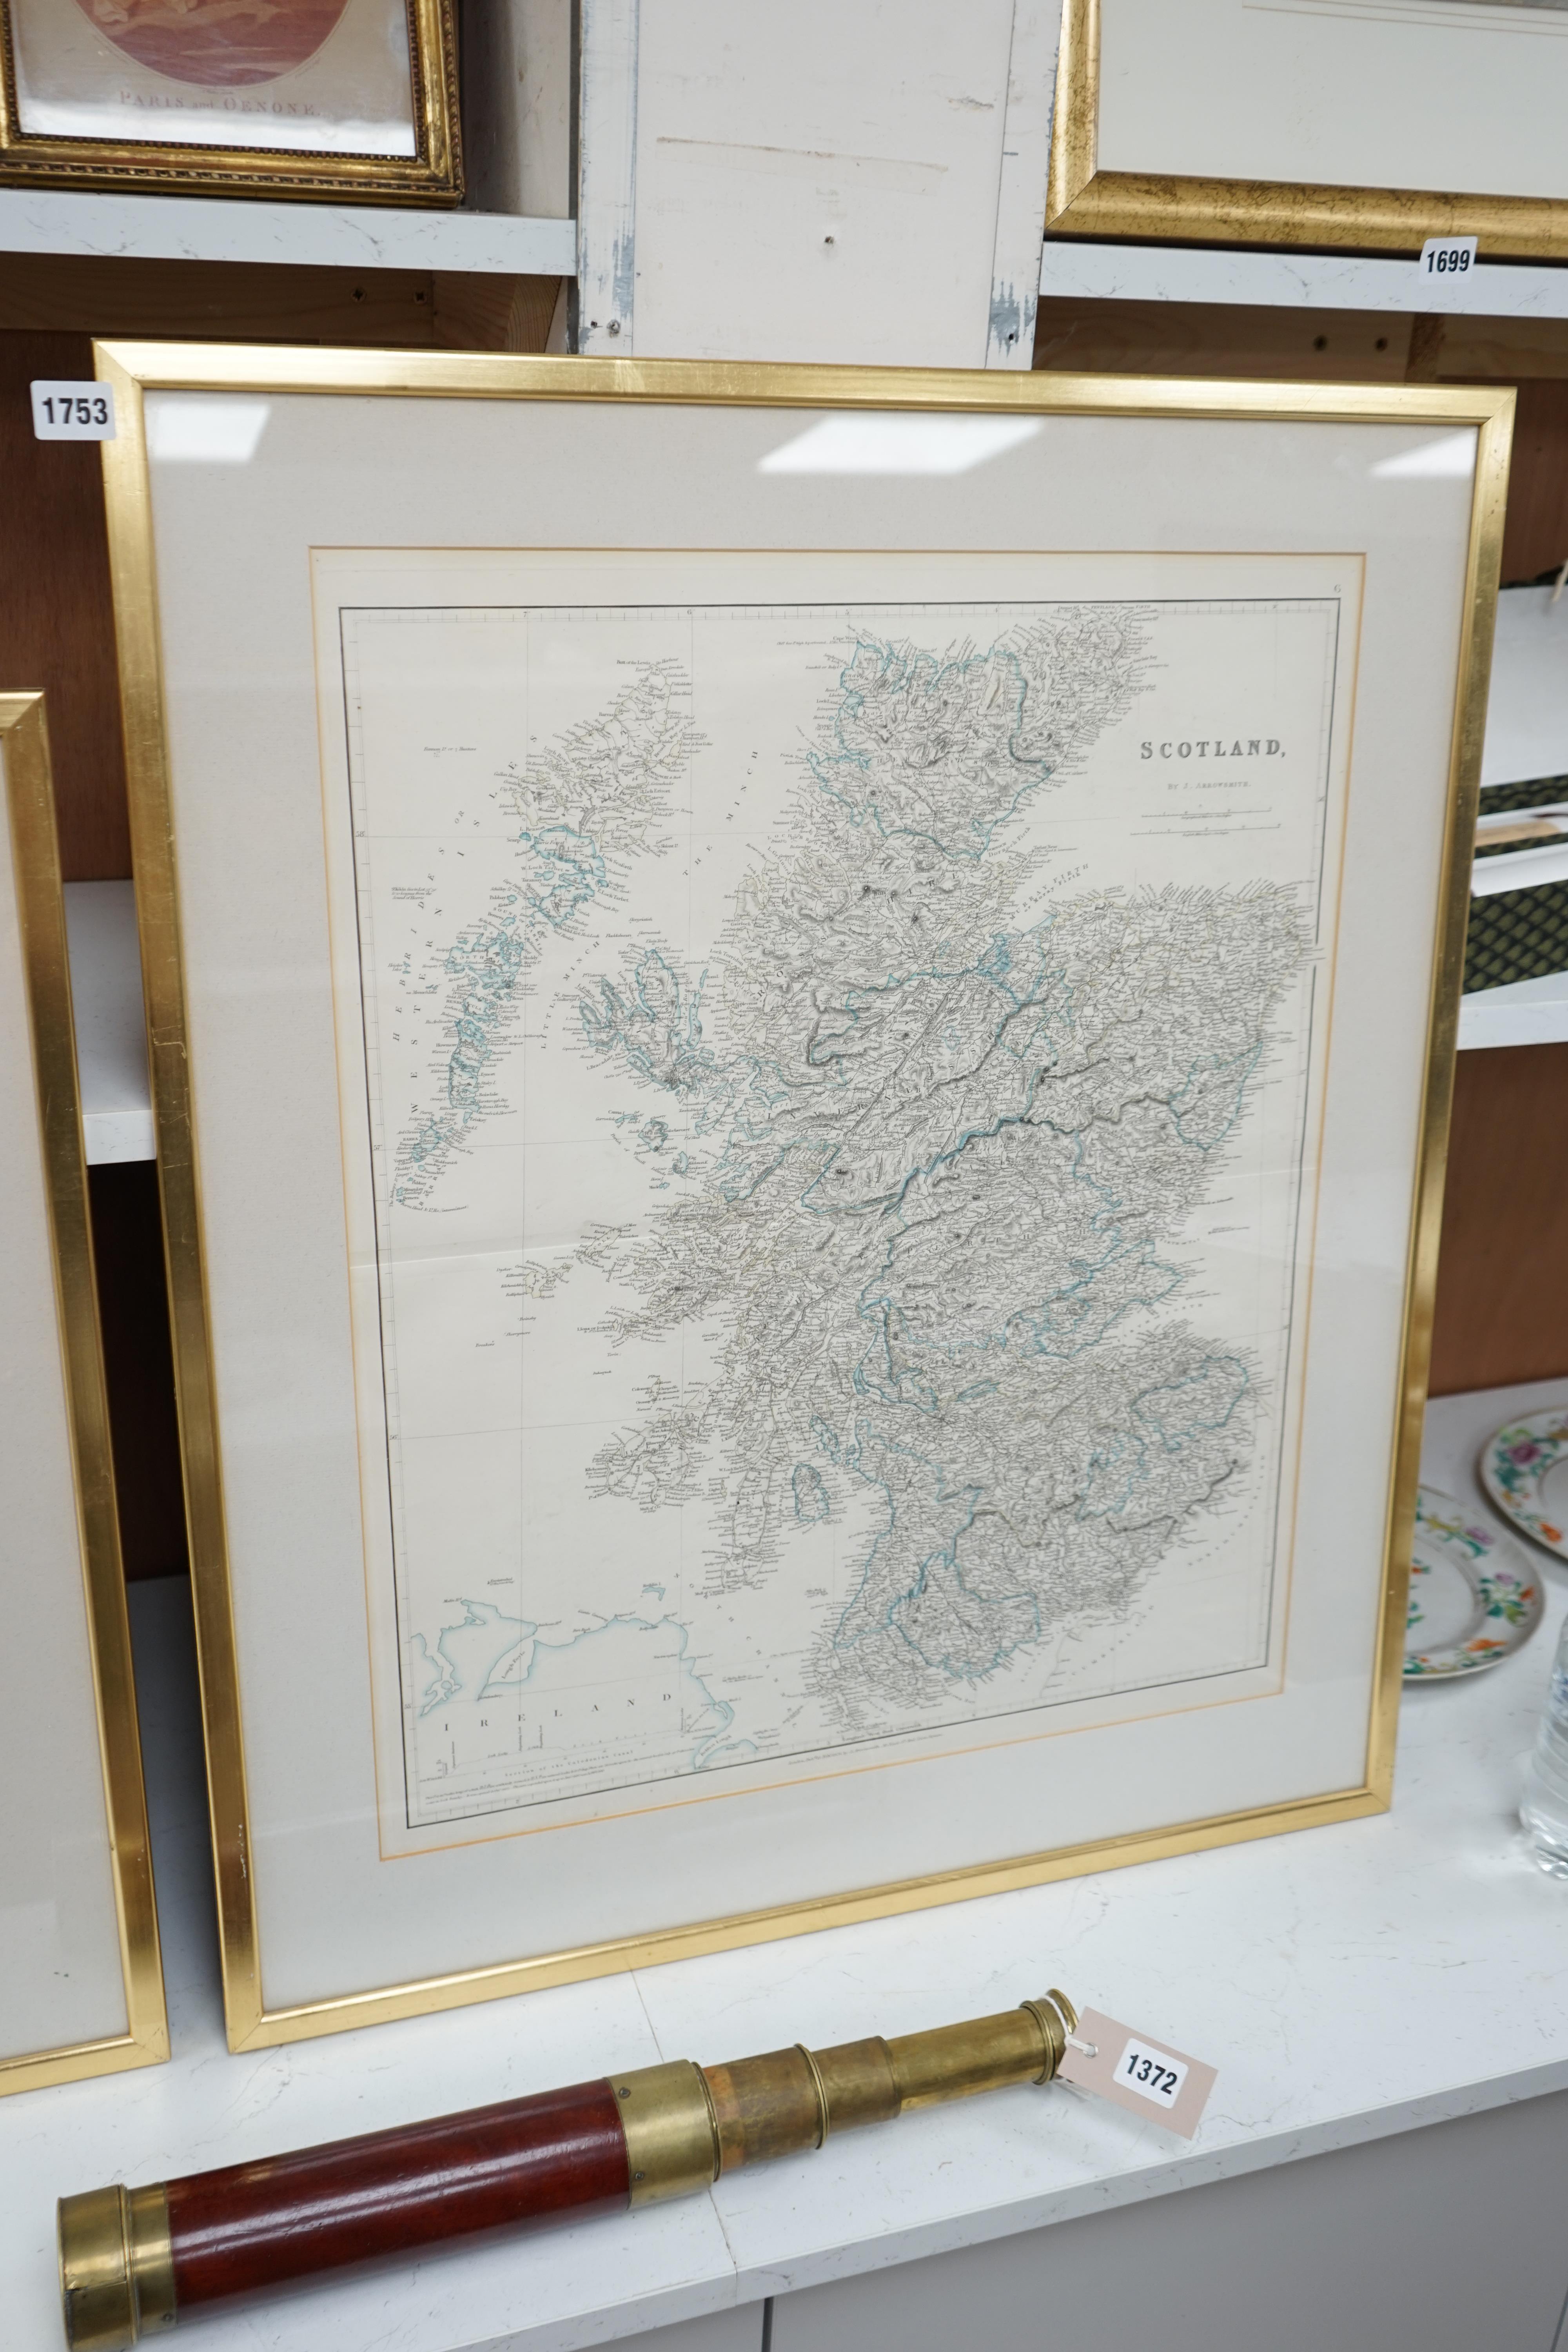 Two 19th century maps, comprising: Scotland by J Arrowsmith, published London 15th February 1834 and a New Map of The County of Sussex printed for C Smith, 6th January 1801, largest 63 x 51cm. Condition - poor to fair, s